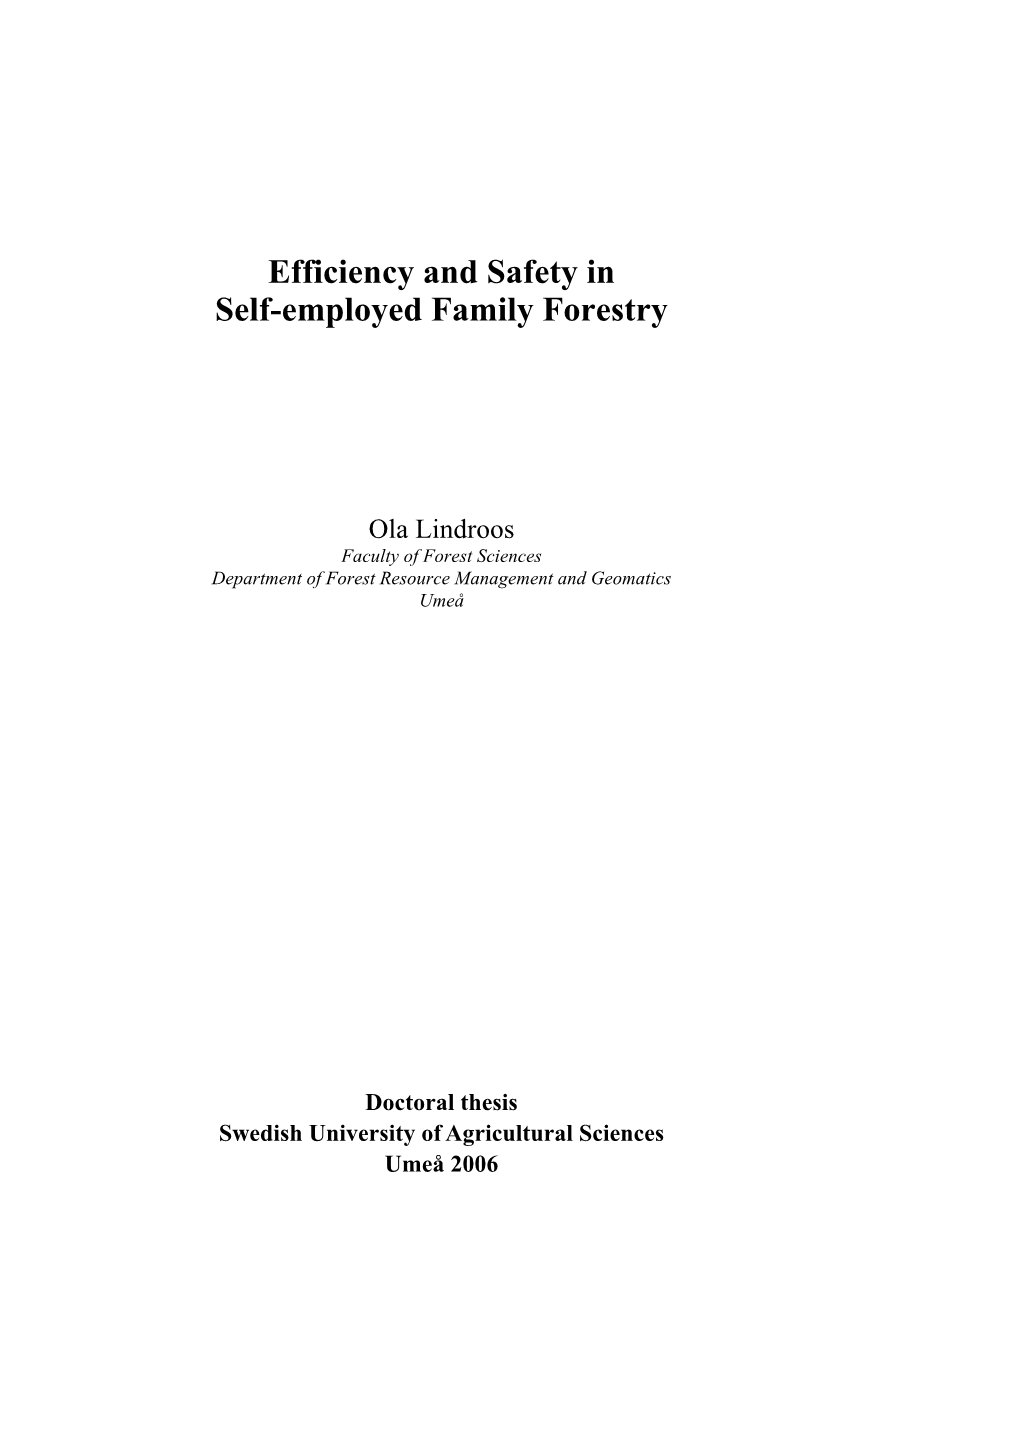 Efficiency and Safety in Self-Employed Family Forestry